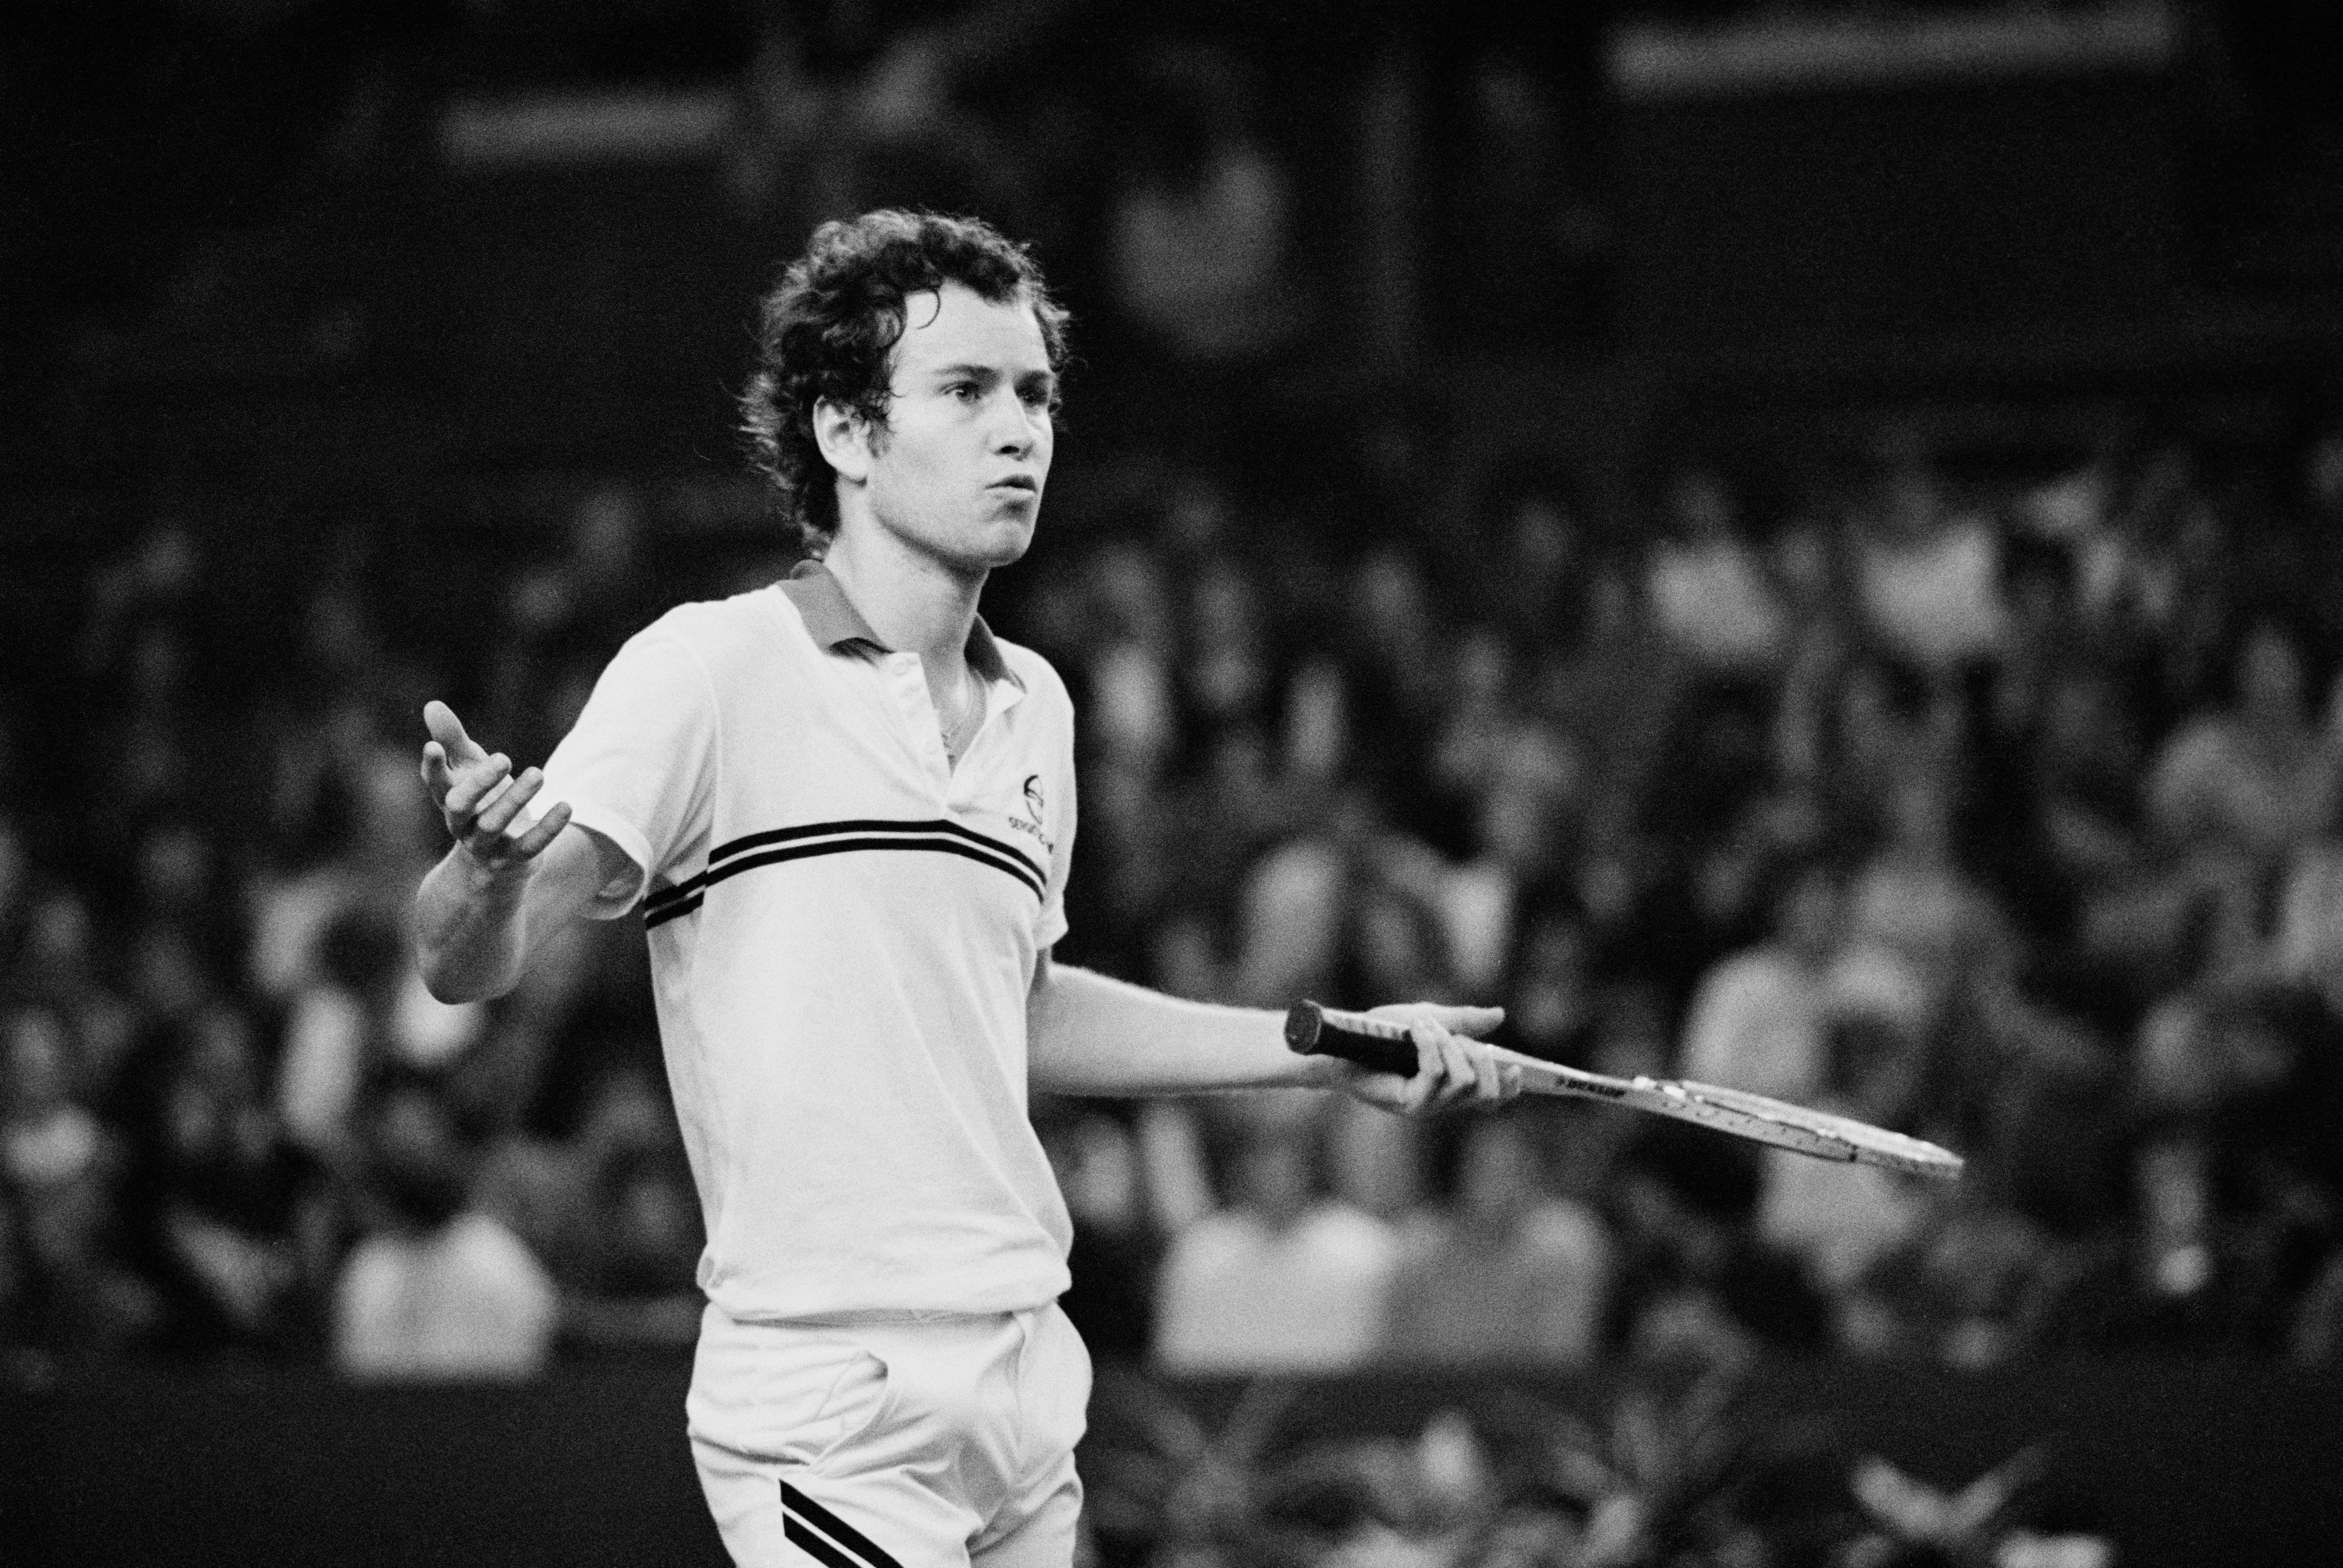 The ball’s out! McEnroe was a genius with the racket but had a terrible temper